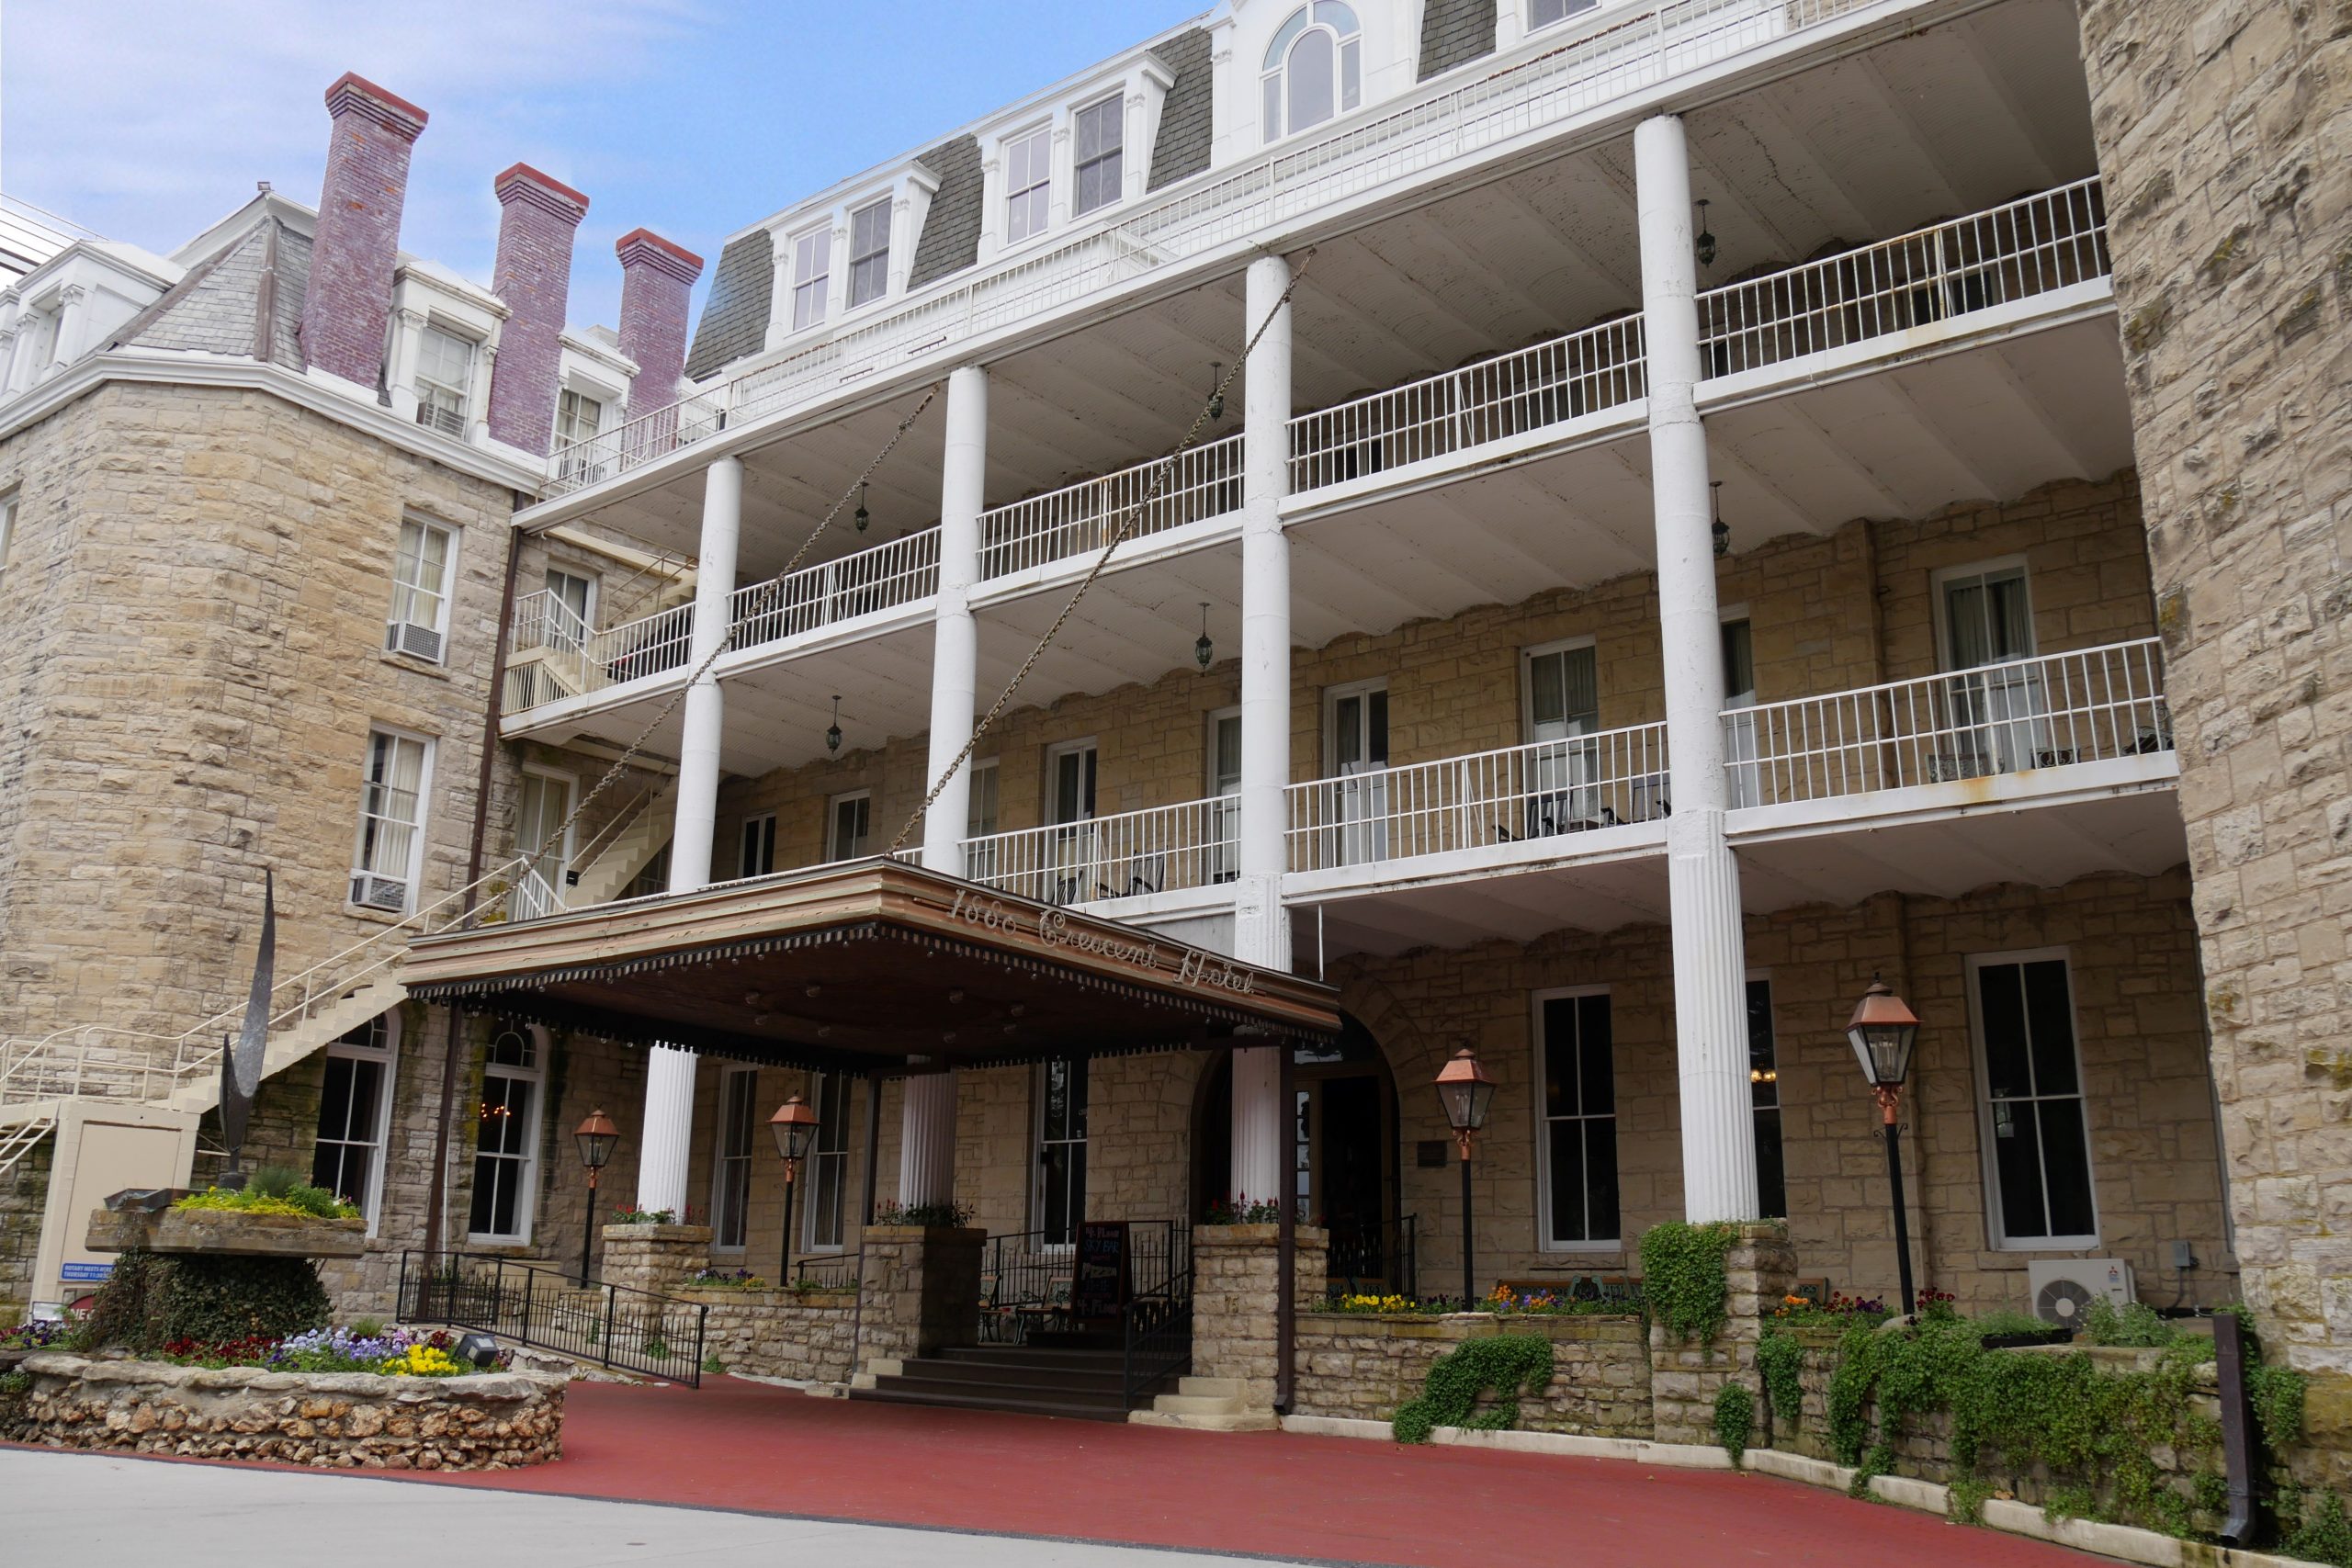 EUREKA SPRINGS, ARKANSAS—May 2017:  Front view of the Crescent Hotel &amp; Spa in Eureka Springs, Arkansas. Built in 1886, the Crescent Hotel is known as America’s most haunted hotel.